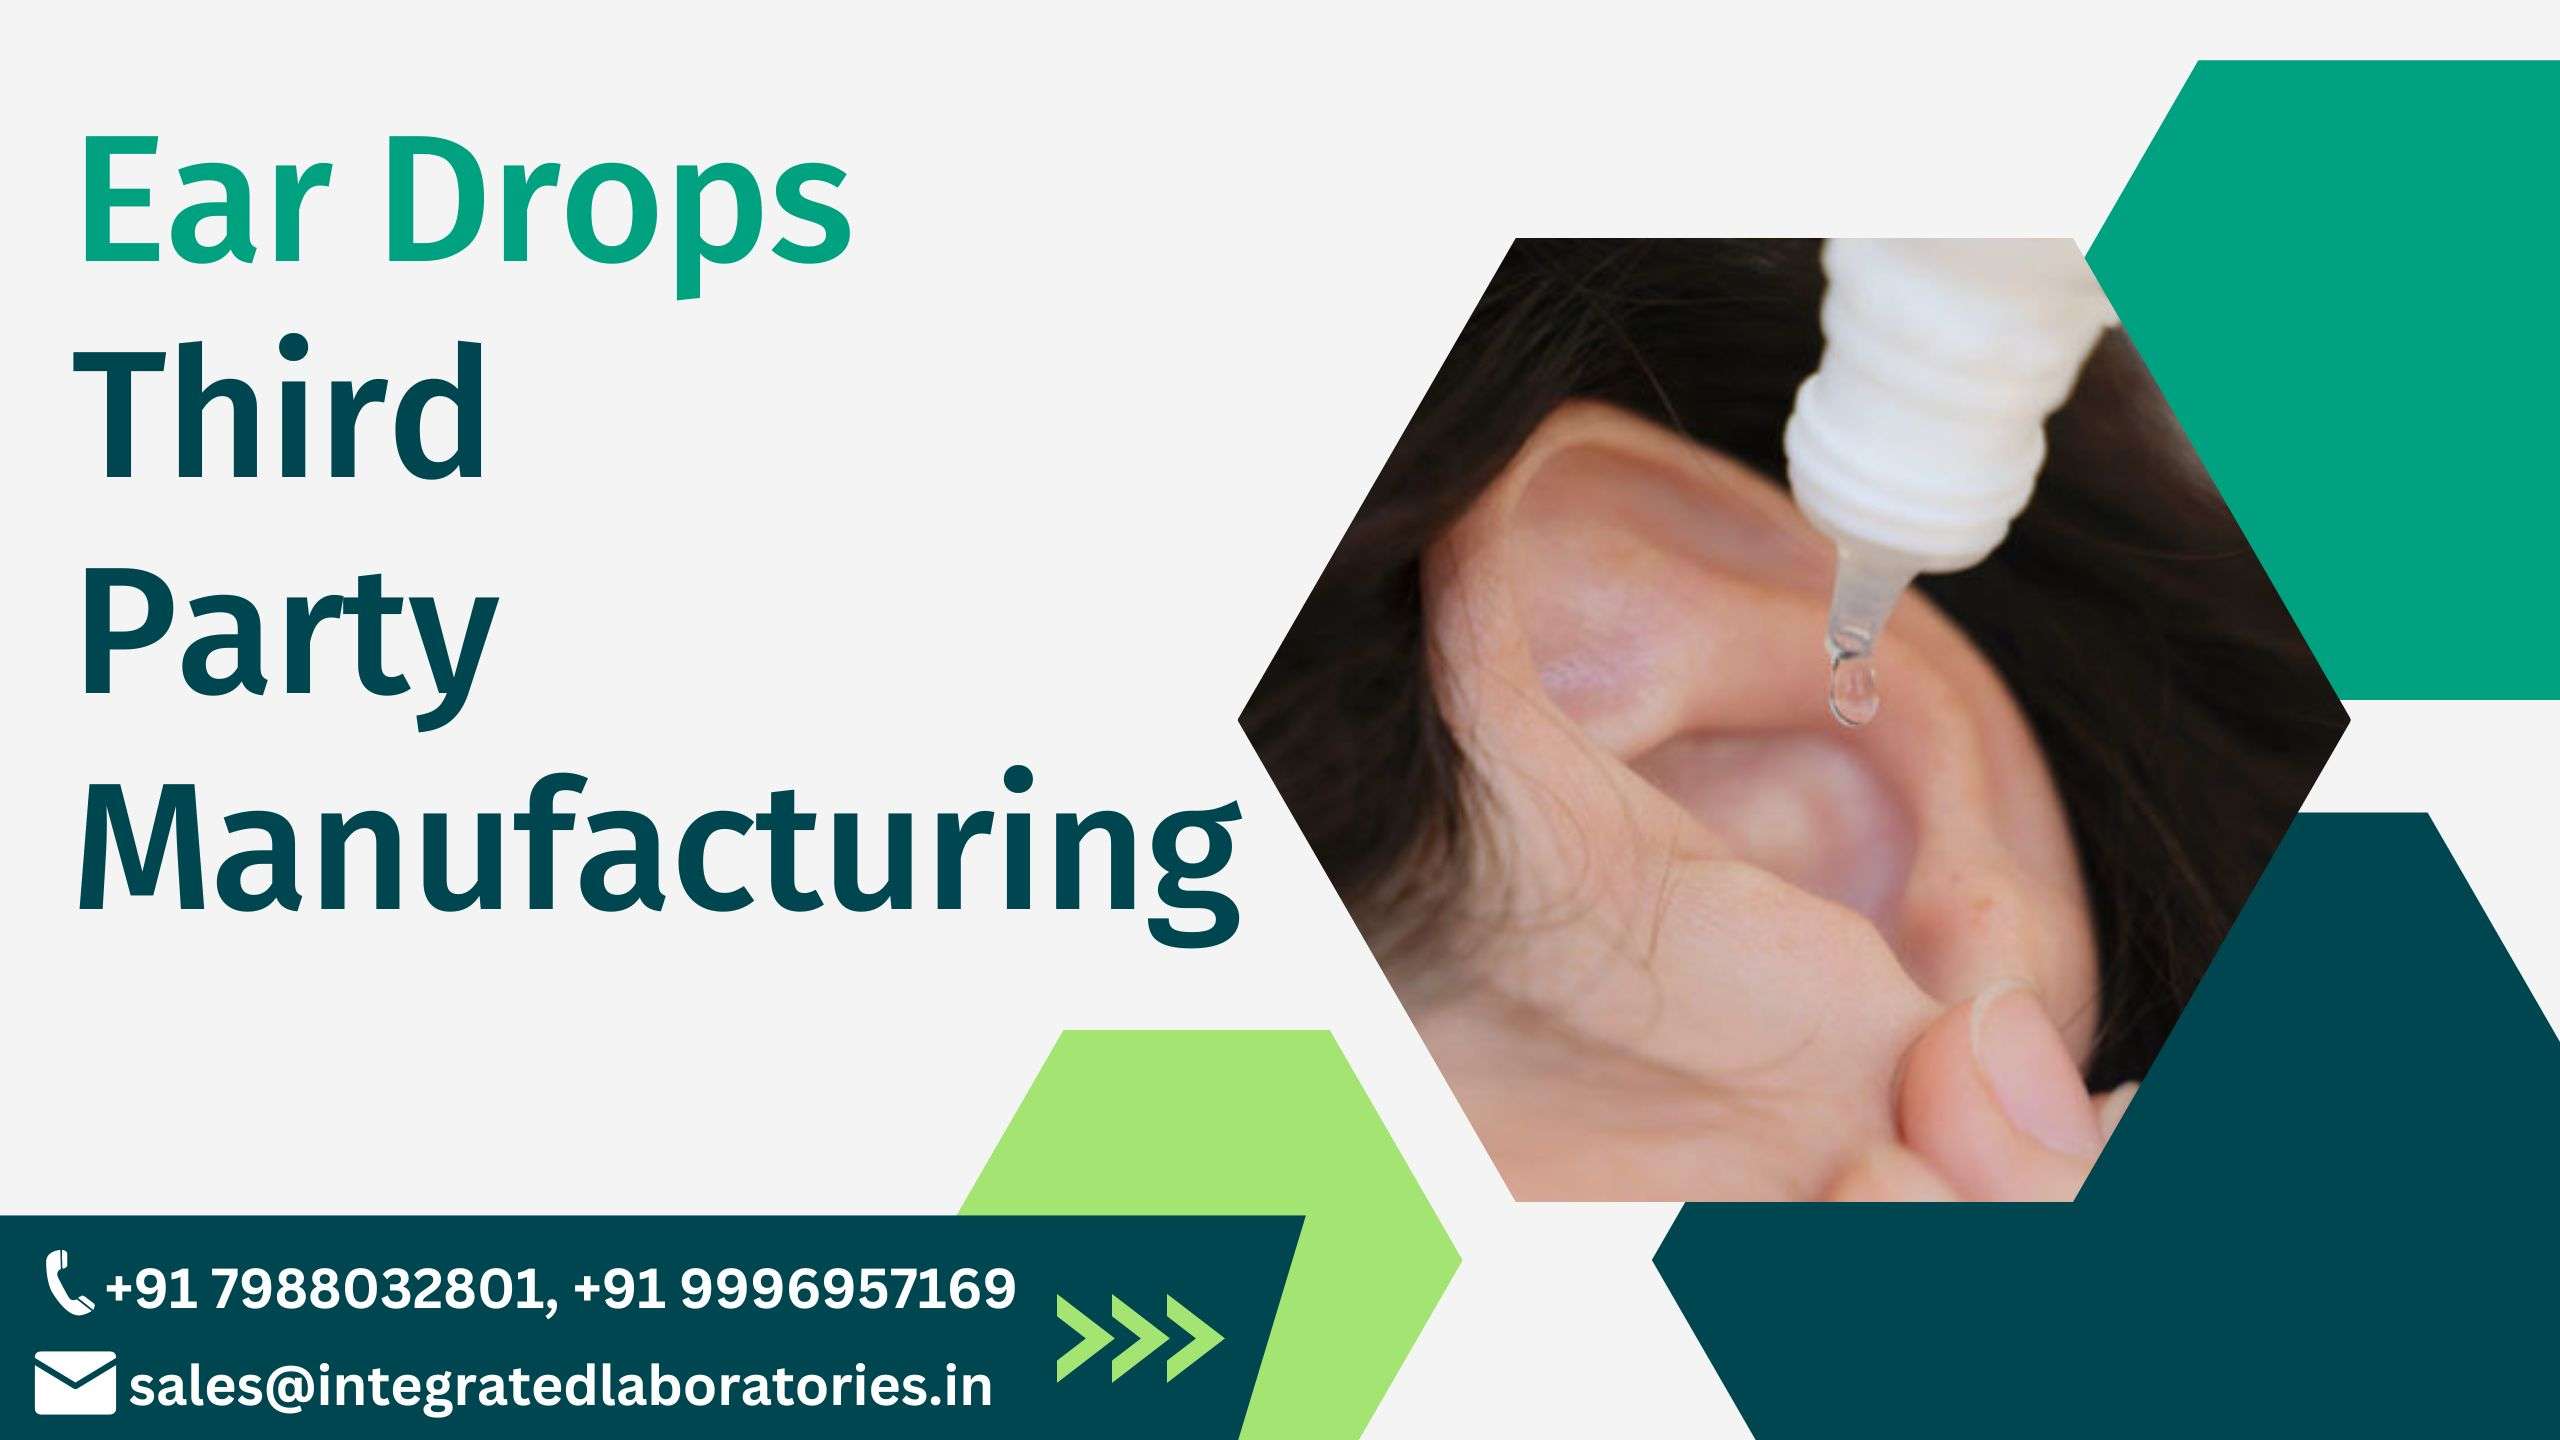 Top Ear Drops Third Party Manufacturing – Integrated Laboratories